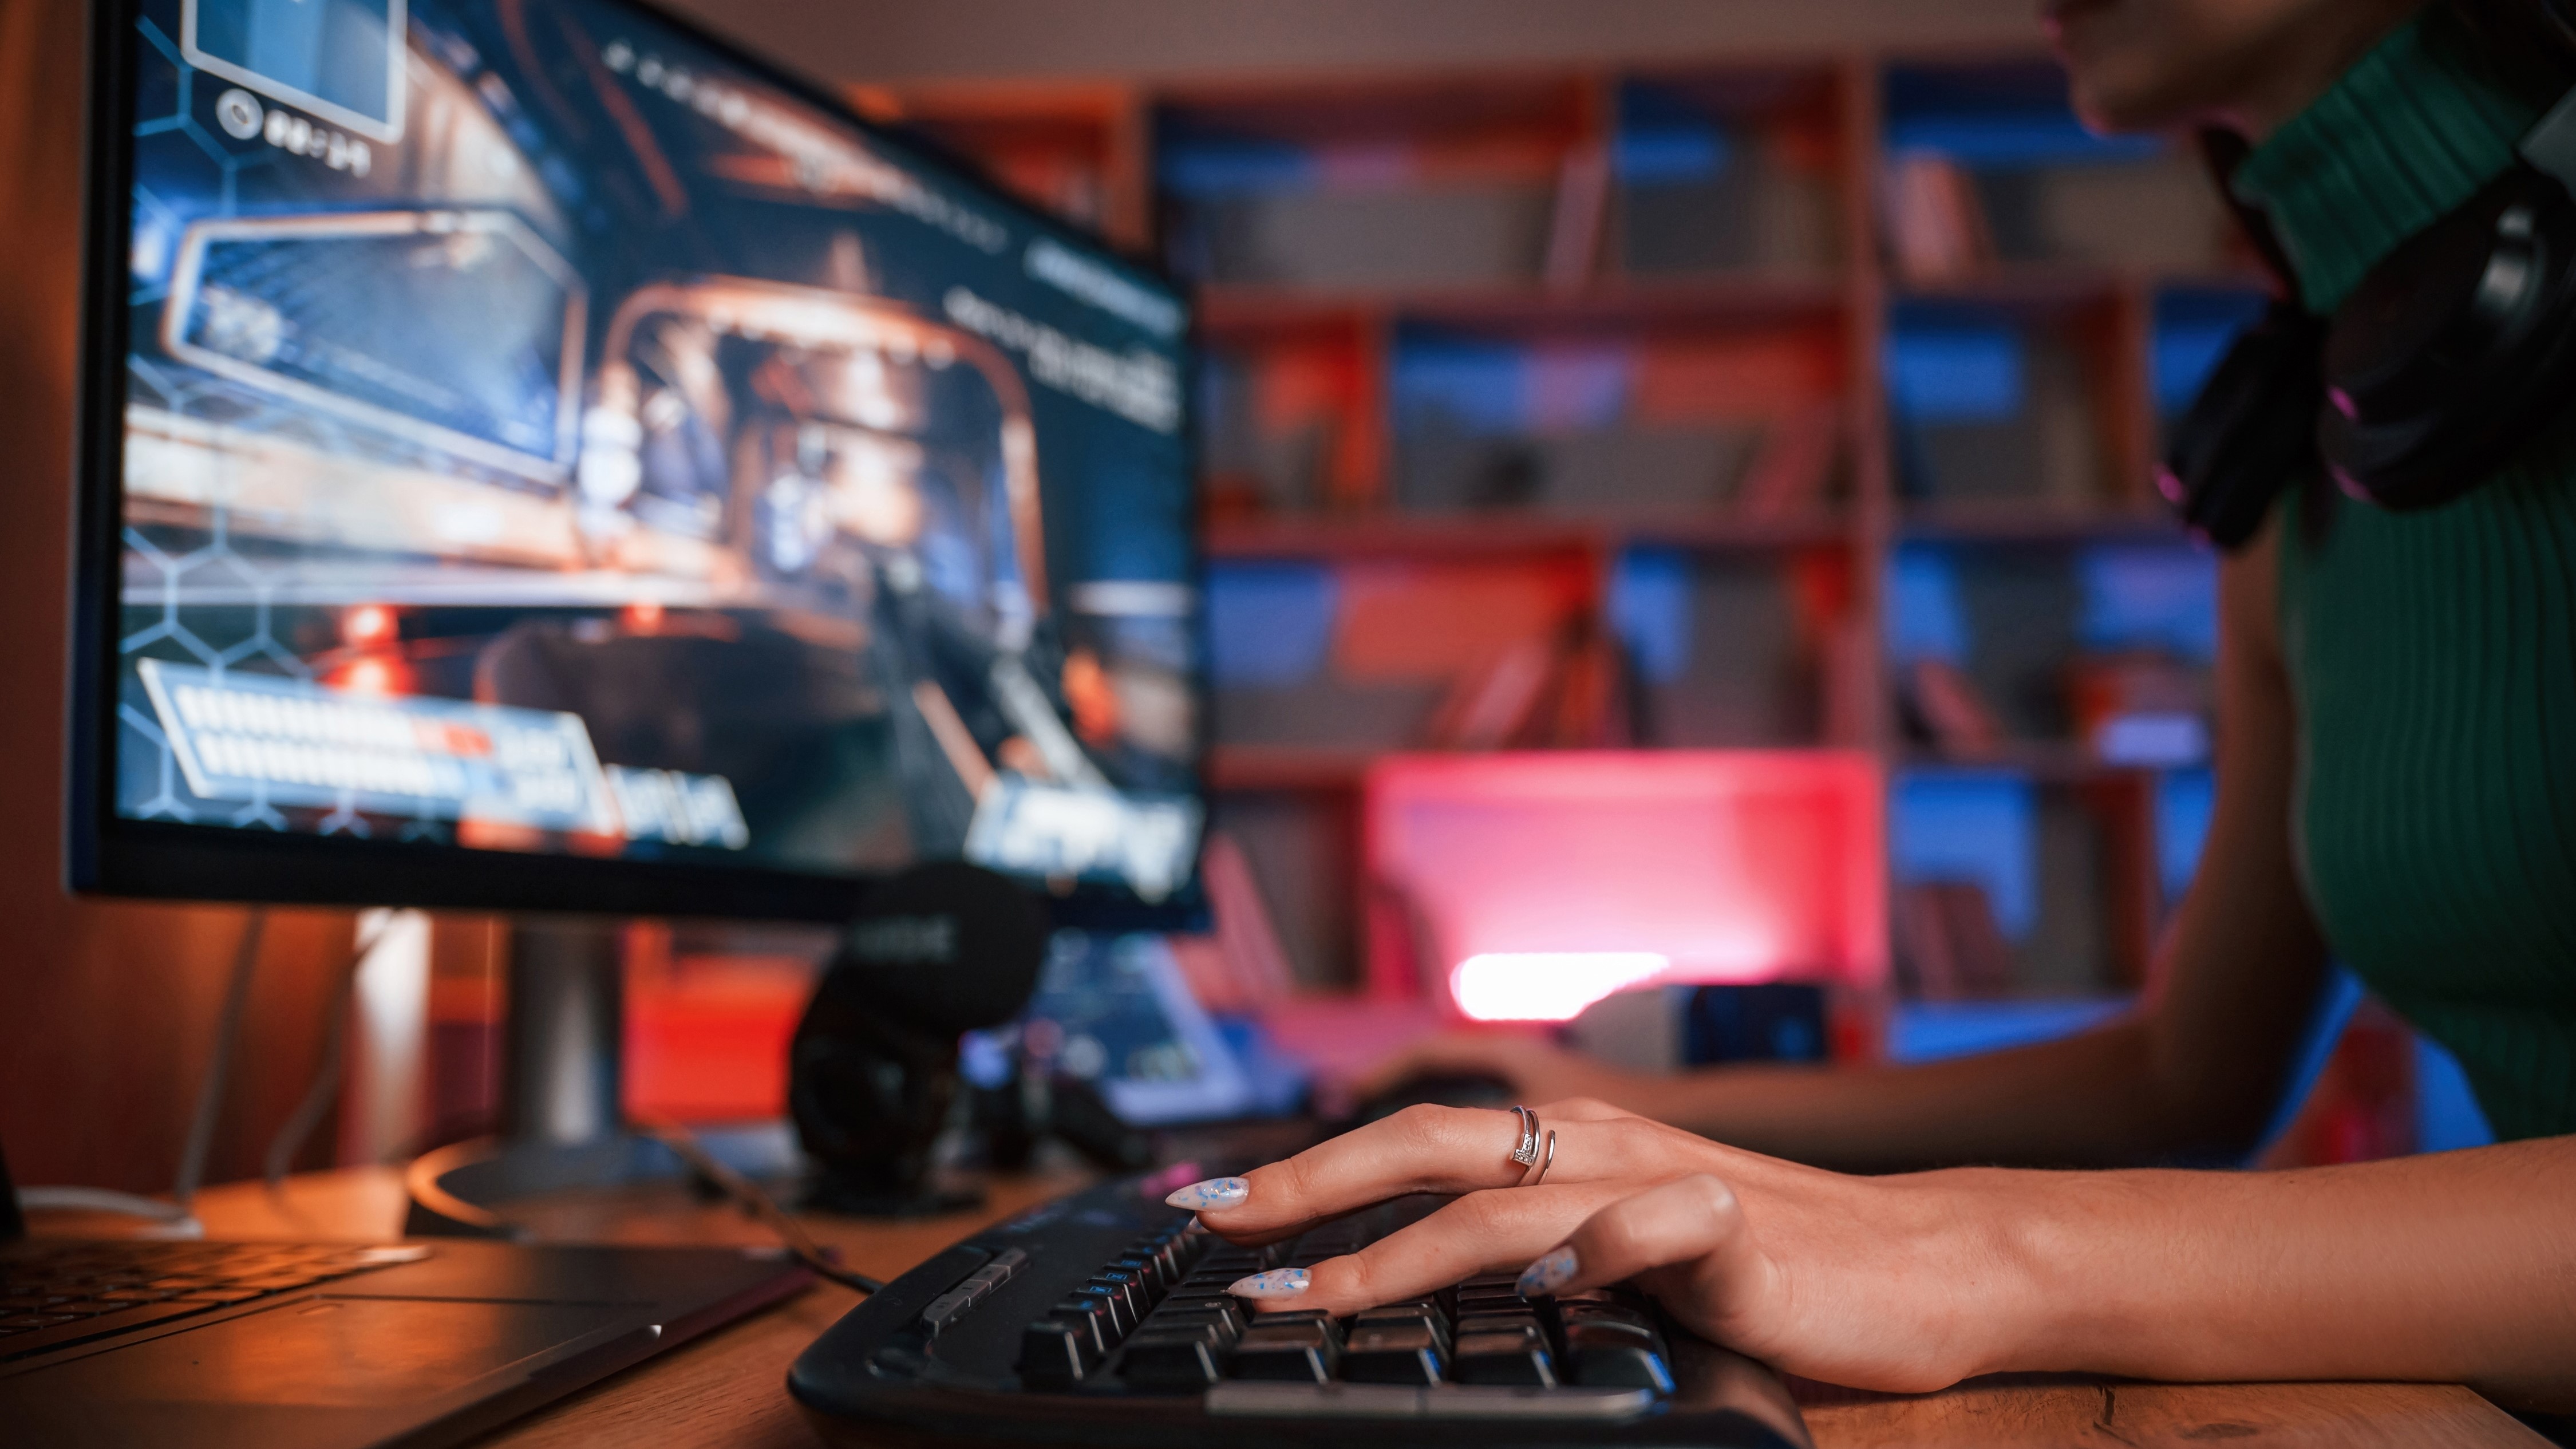 A close up of a keyboard and a woman gaming at a PC in neon lighting